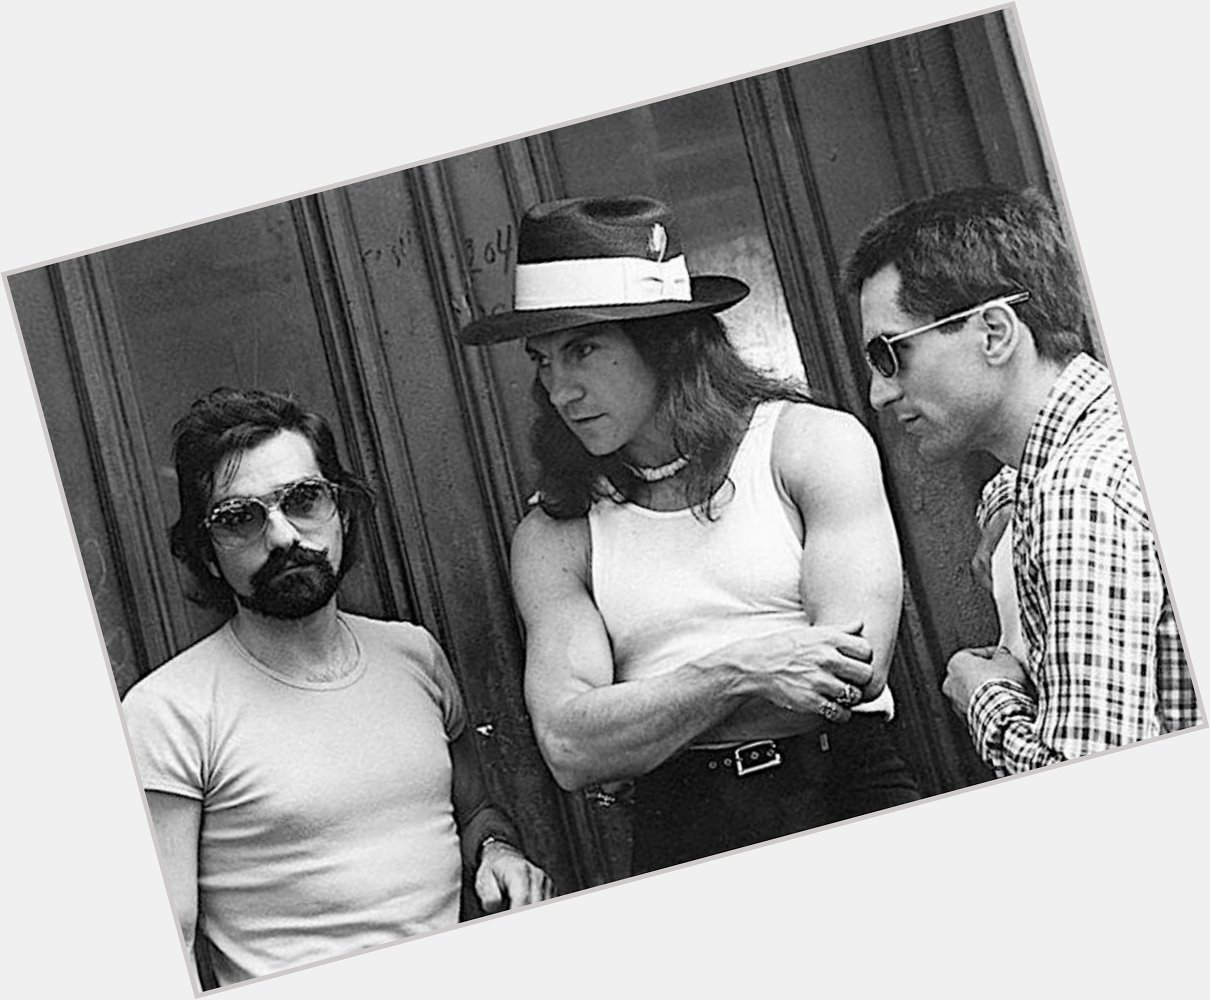 Happy Birthday to MARTIN SCORSESE, shown here with Sport and Travis on the set of TAXI DRIVER. 